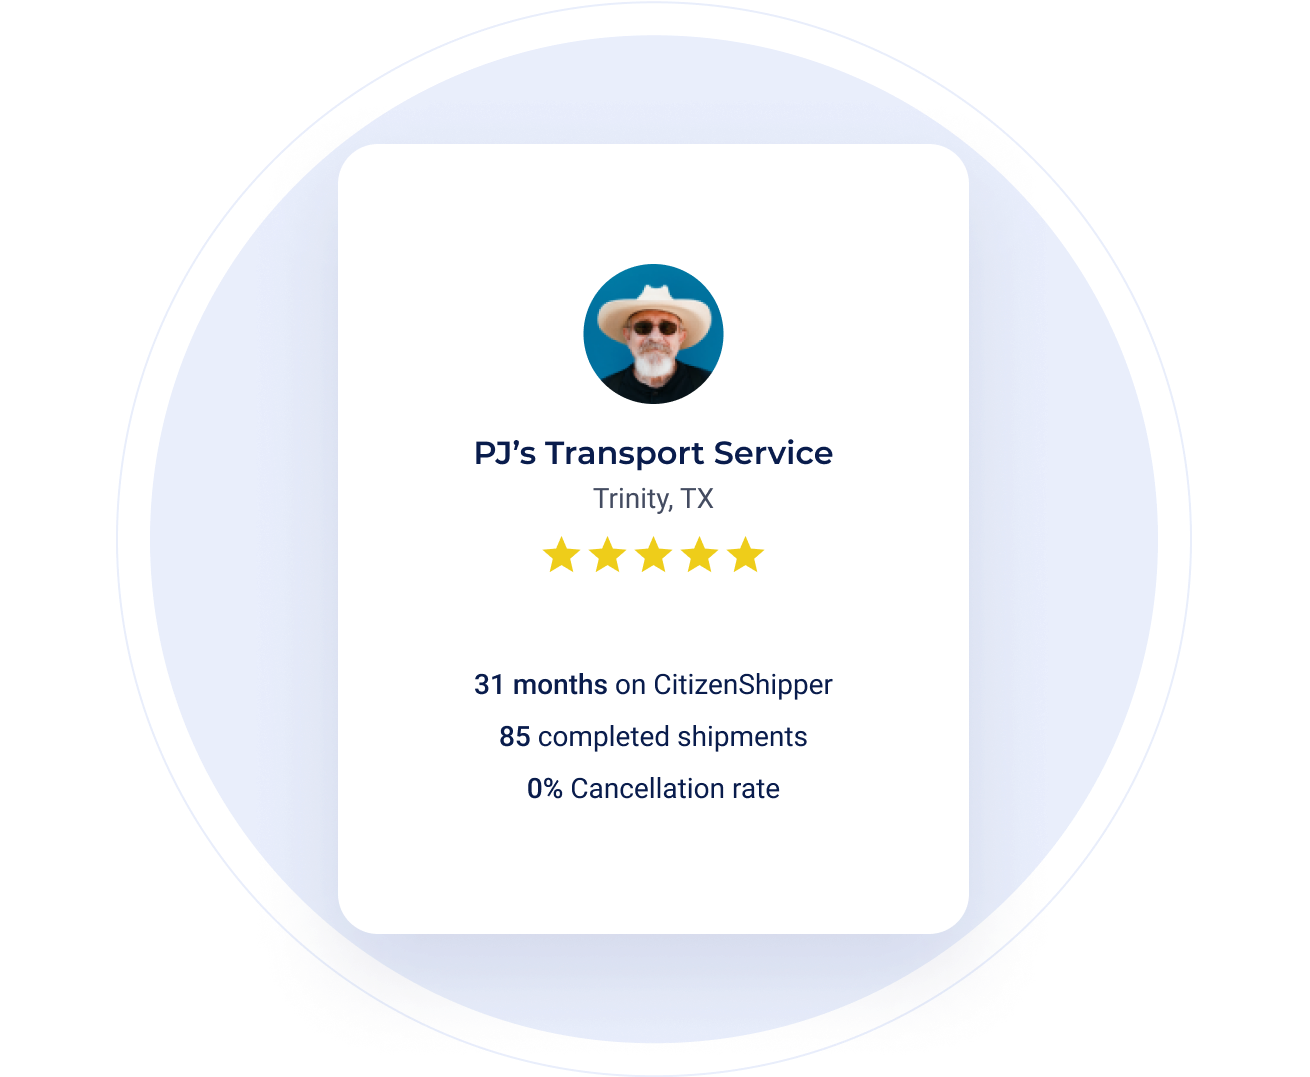 CitizenShipper driver profile card with ratings and reliability details for PF's transport service.